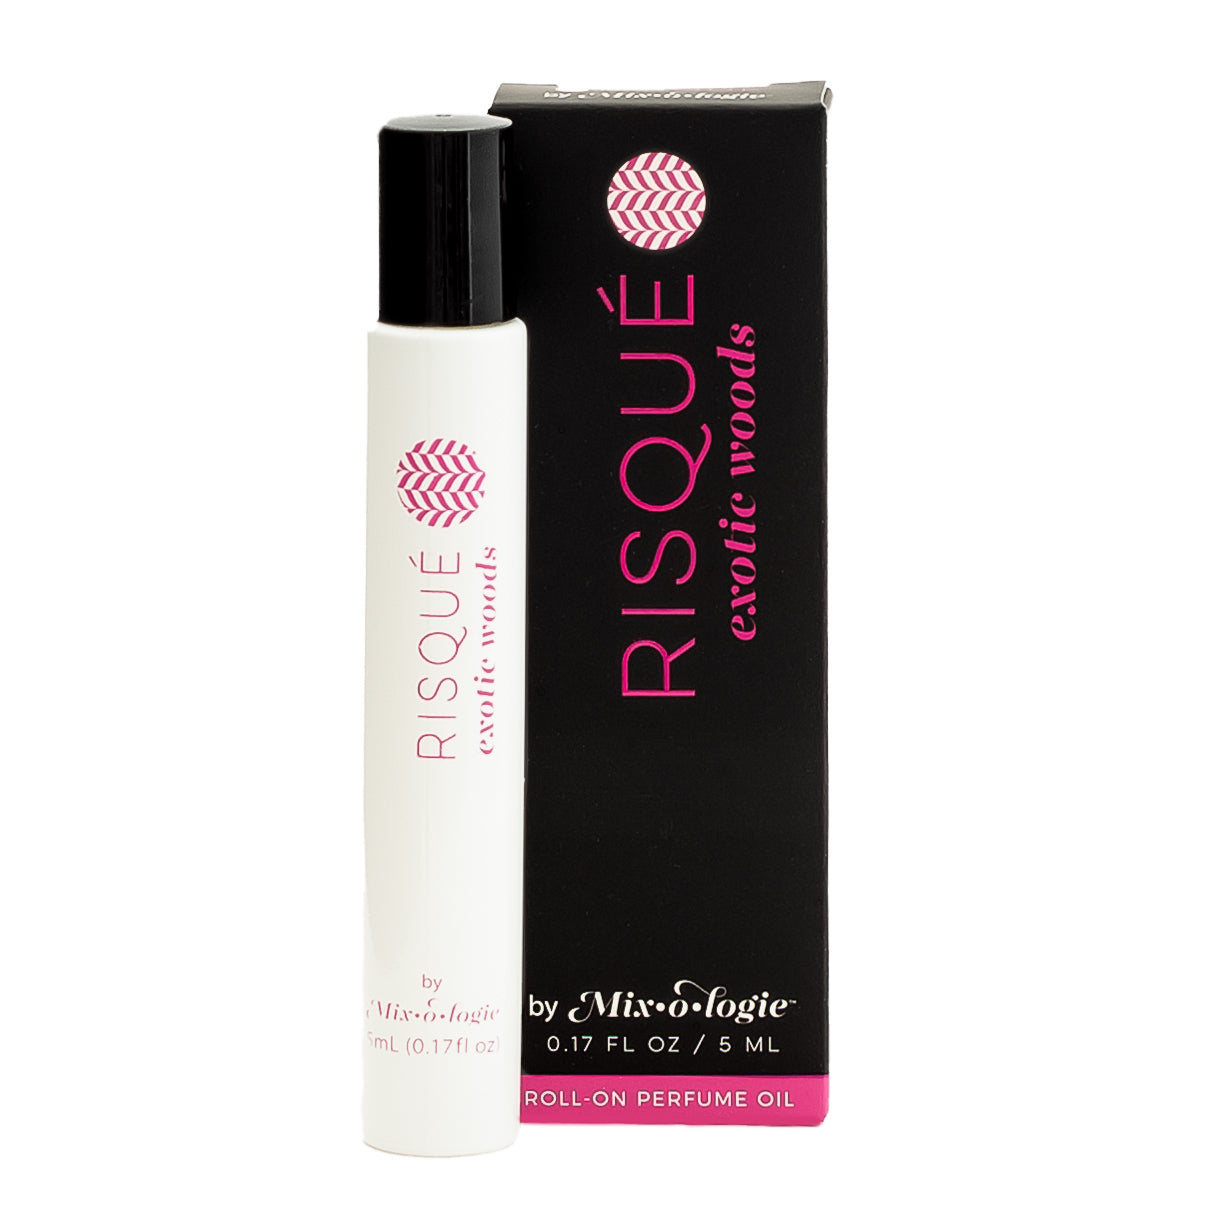 Risqué (Exotic Woods) - Perfume Oil Rollerball (5 mL)